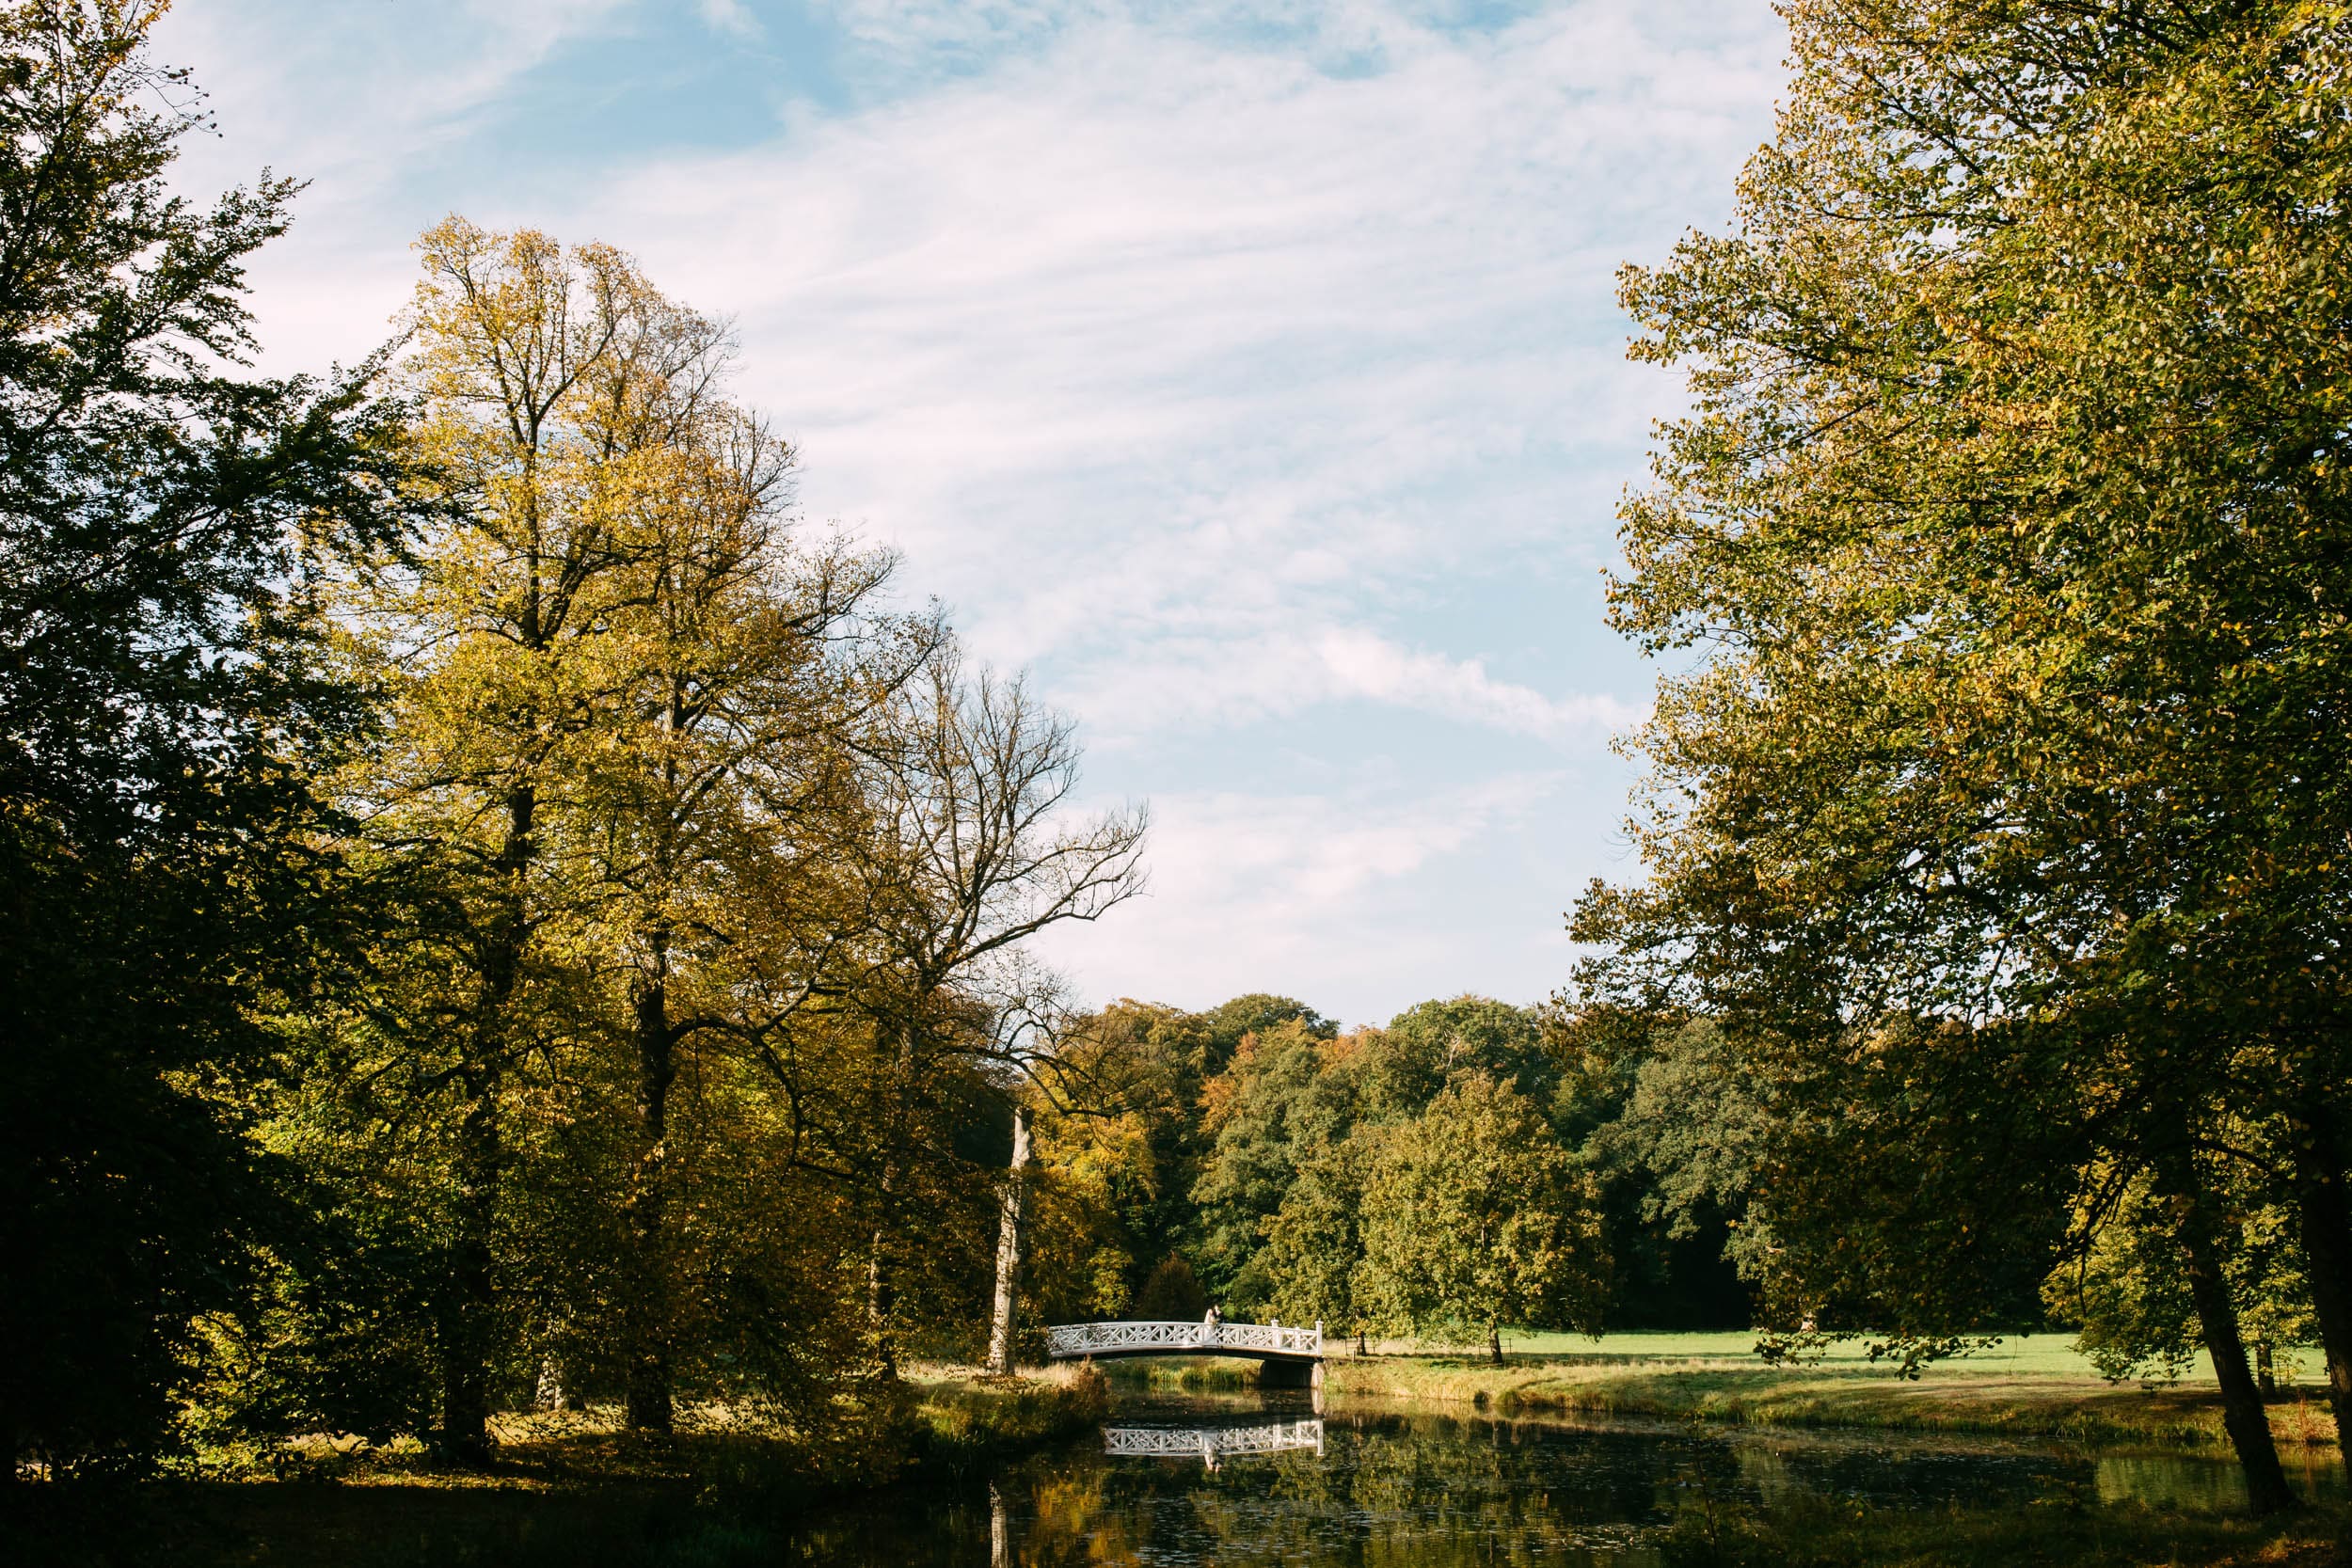 The Orangerie in Elswout is an oasis of tranquillity, with a pond surrounded by lush trees and connected by a charming bridge.